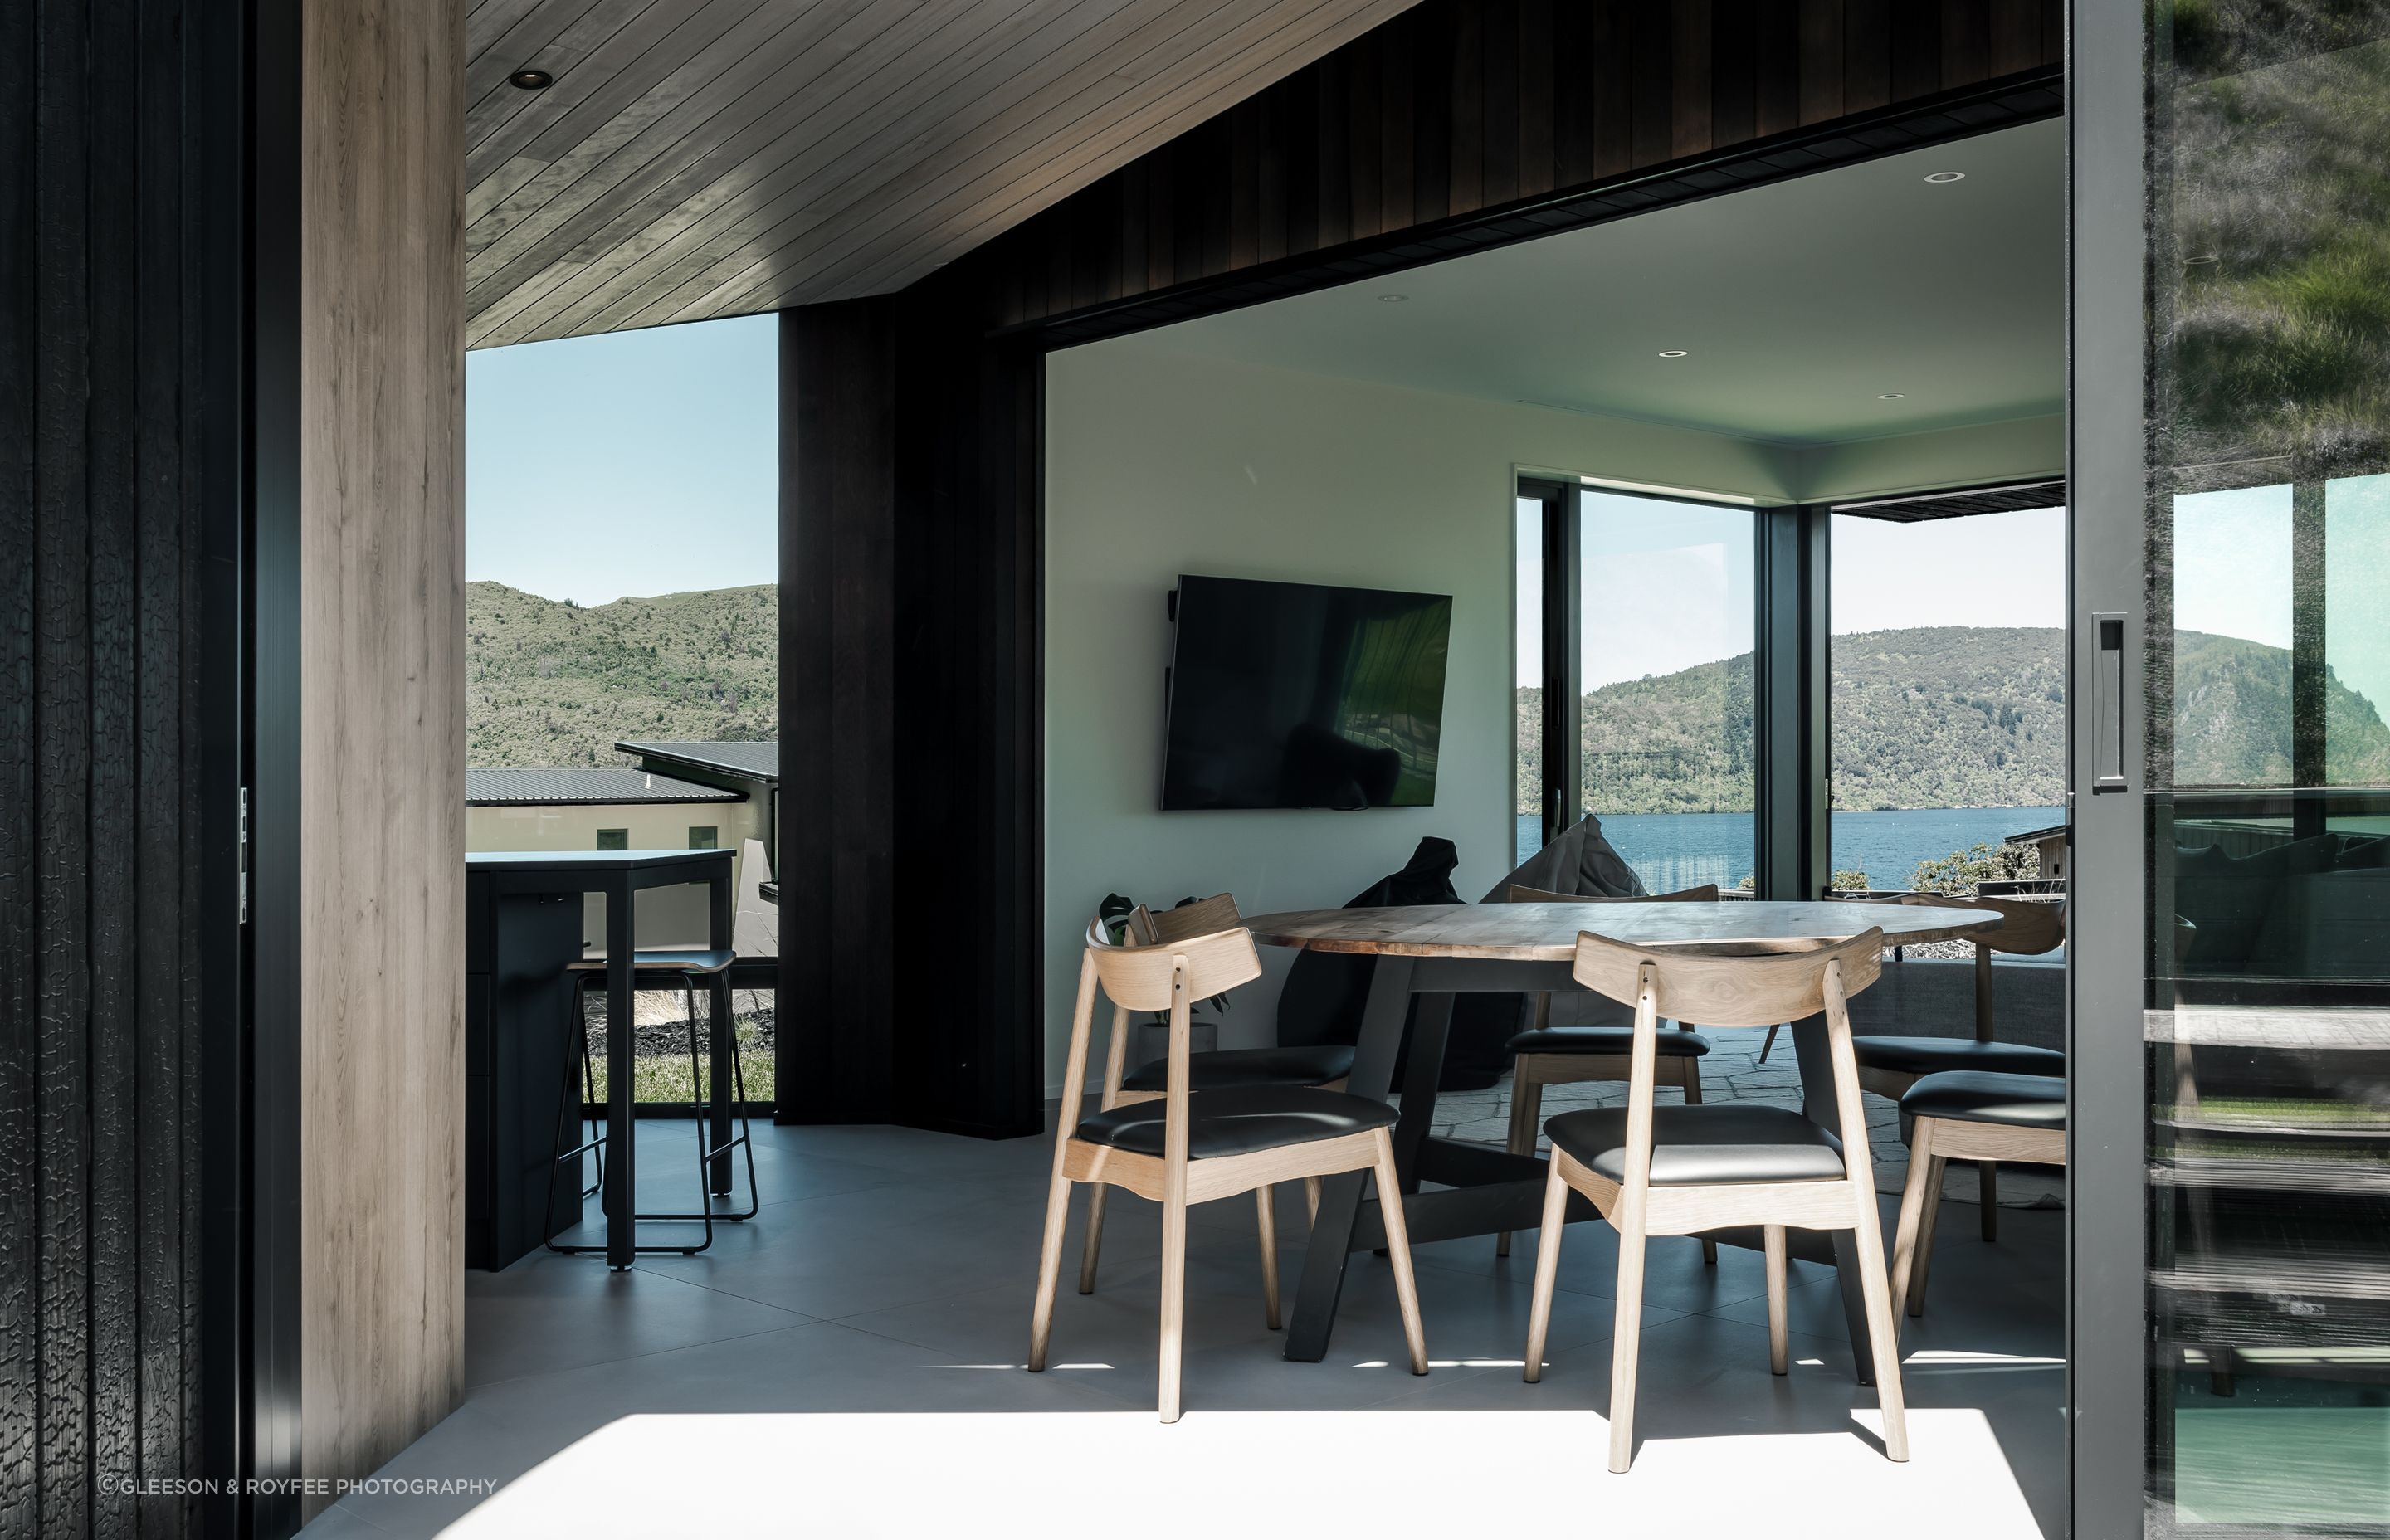 The Kinloch Retreat's kitchen/dining pavilion is angled to frame &amp; connect to Lake Taupō beyond